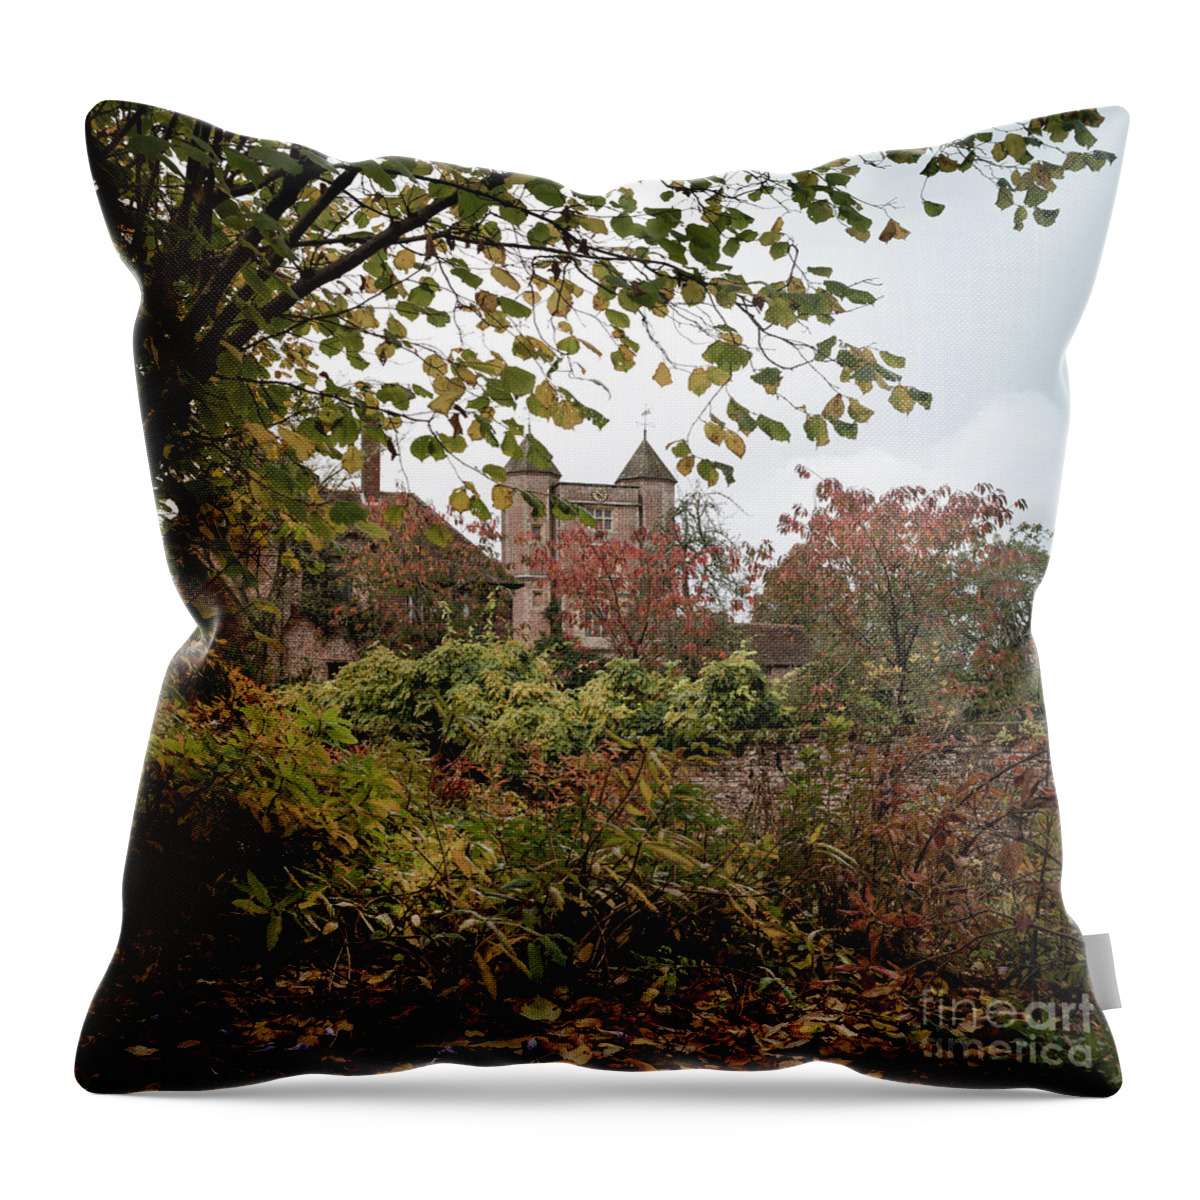 Russet Throw Pillow featuring the photograph Through Leaves, Sissinghurst Castle Gardens by Perry Rodriguez